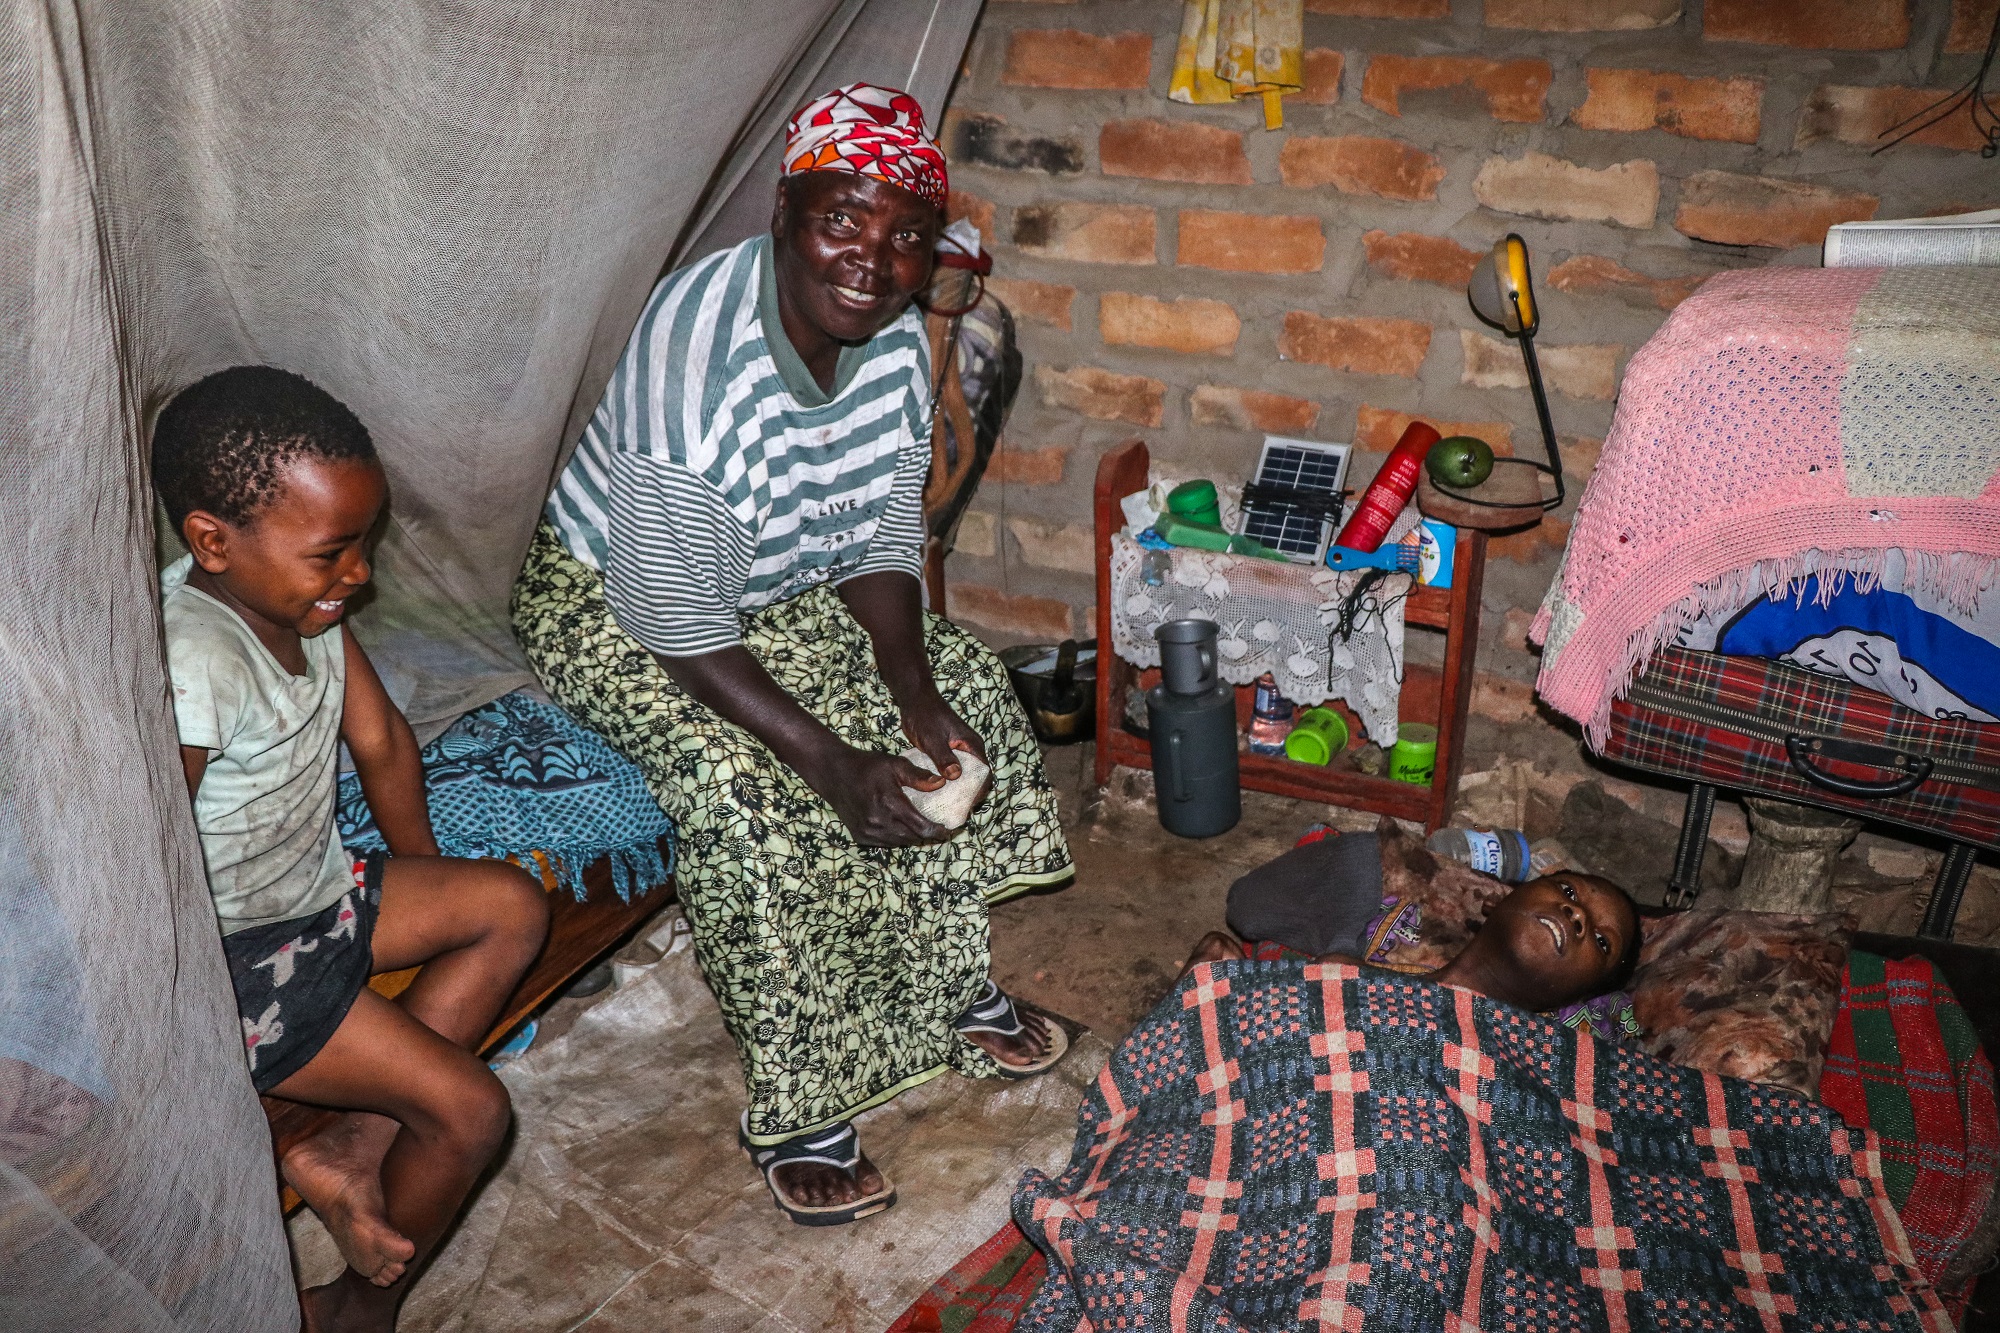 Mirriam 19, has been bedridden from the time she was 2months old following an illness. Abandoned by her mother. Her grandmother looks after her.